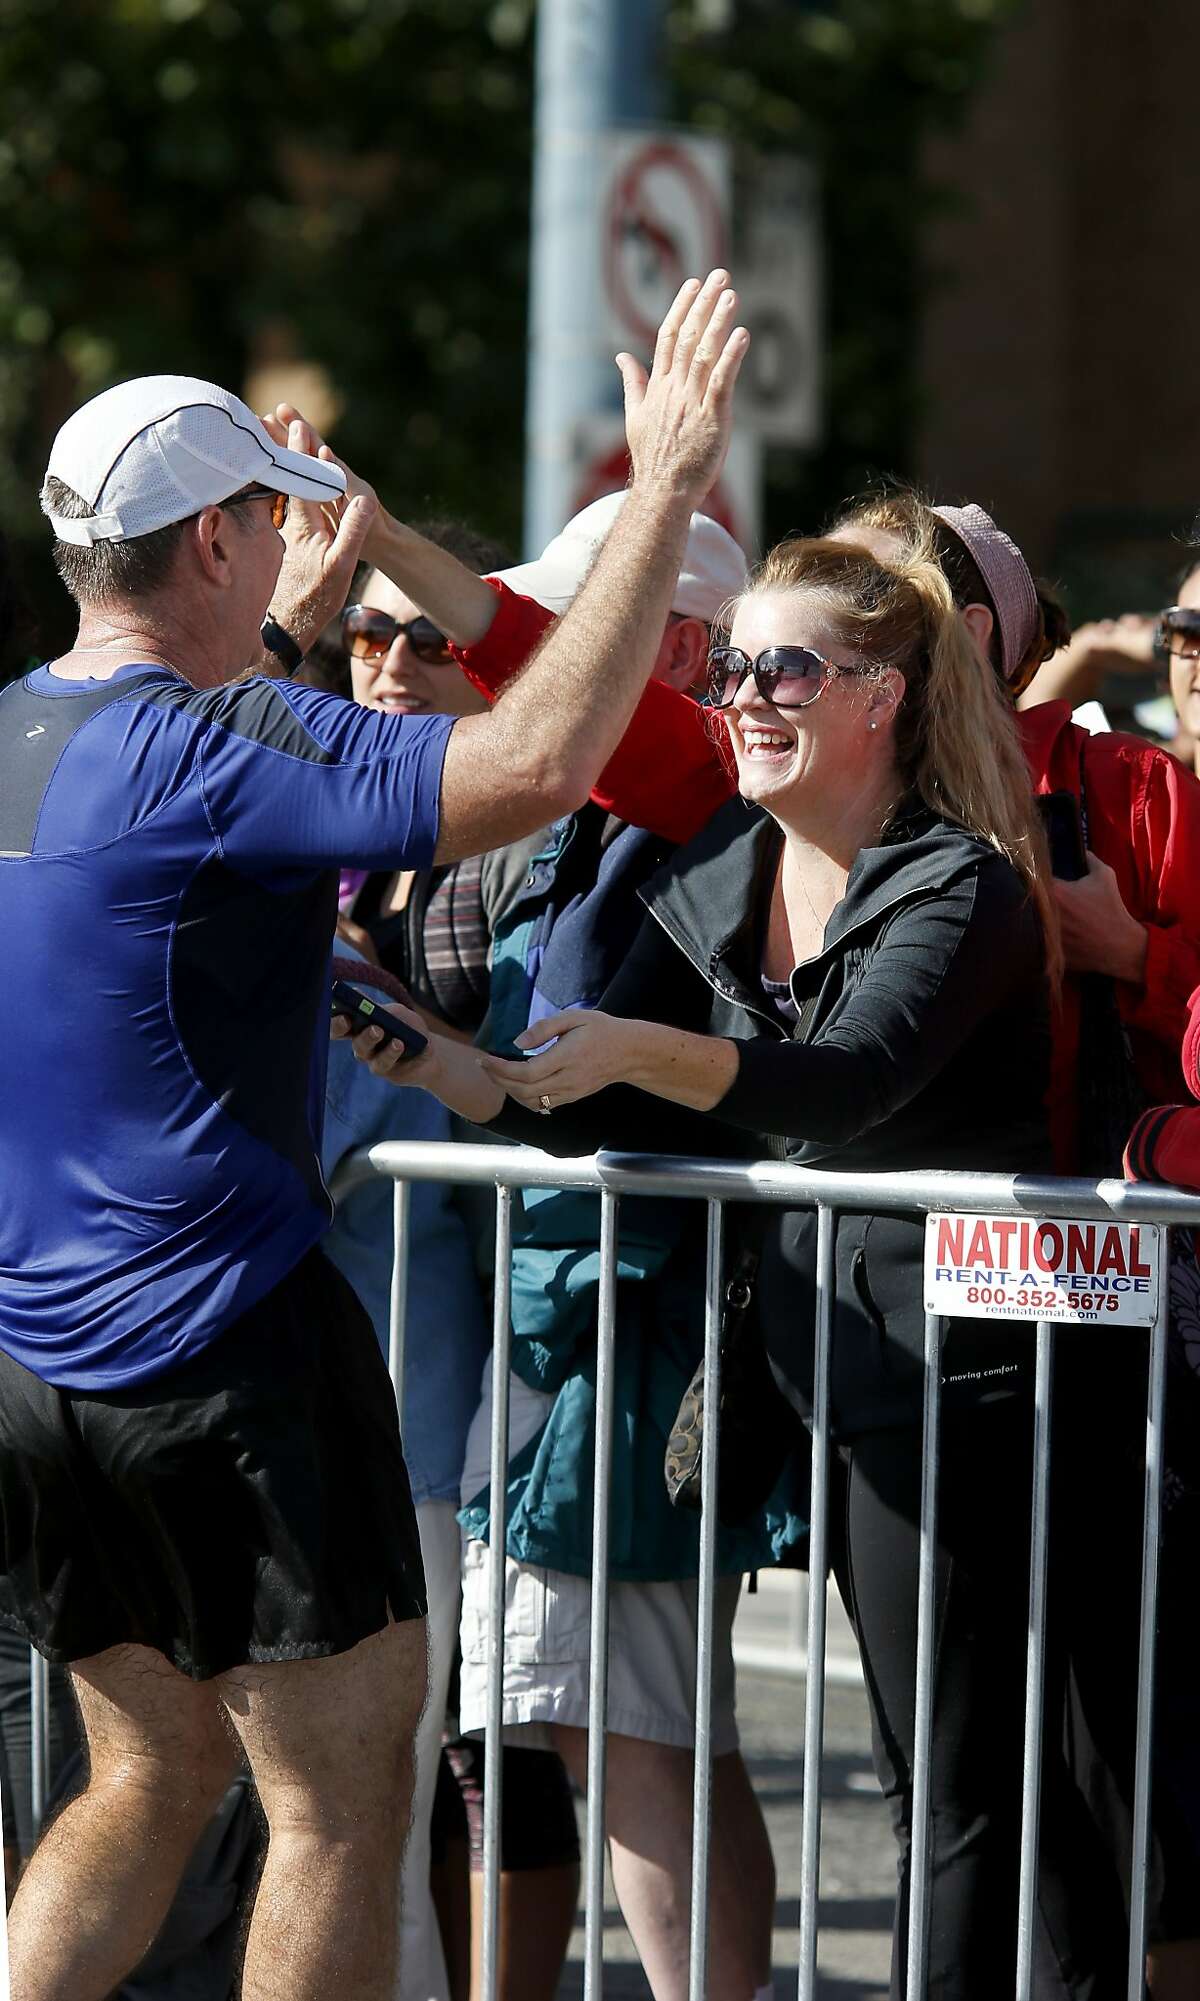 Morning cool helps as thousands pound S.F. Marathon